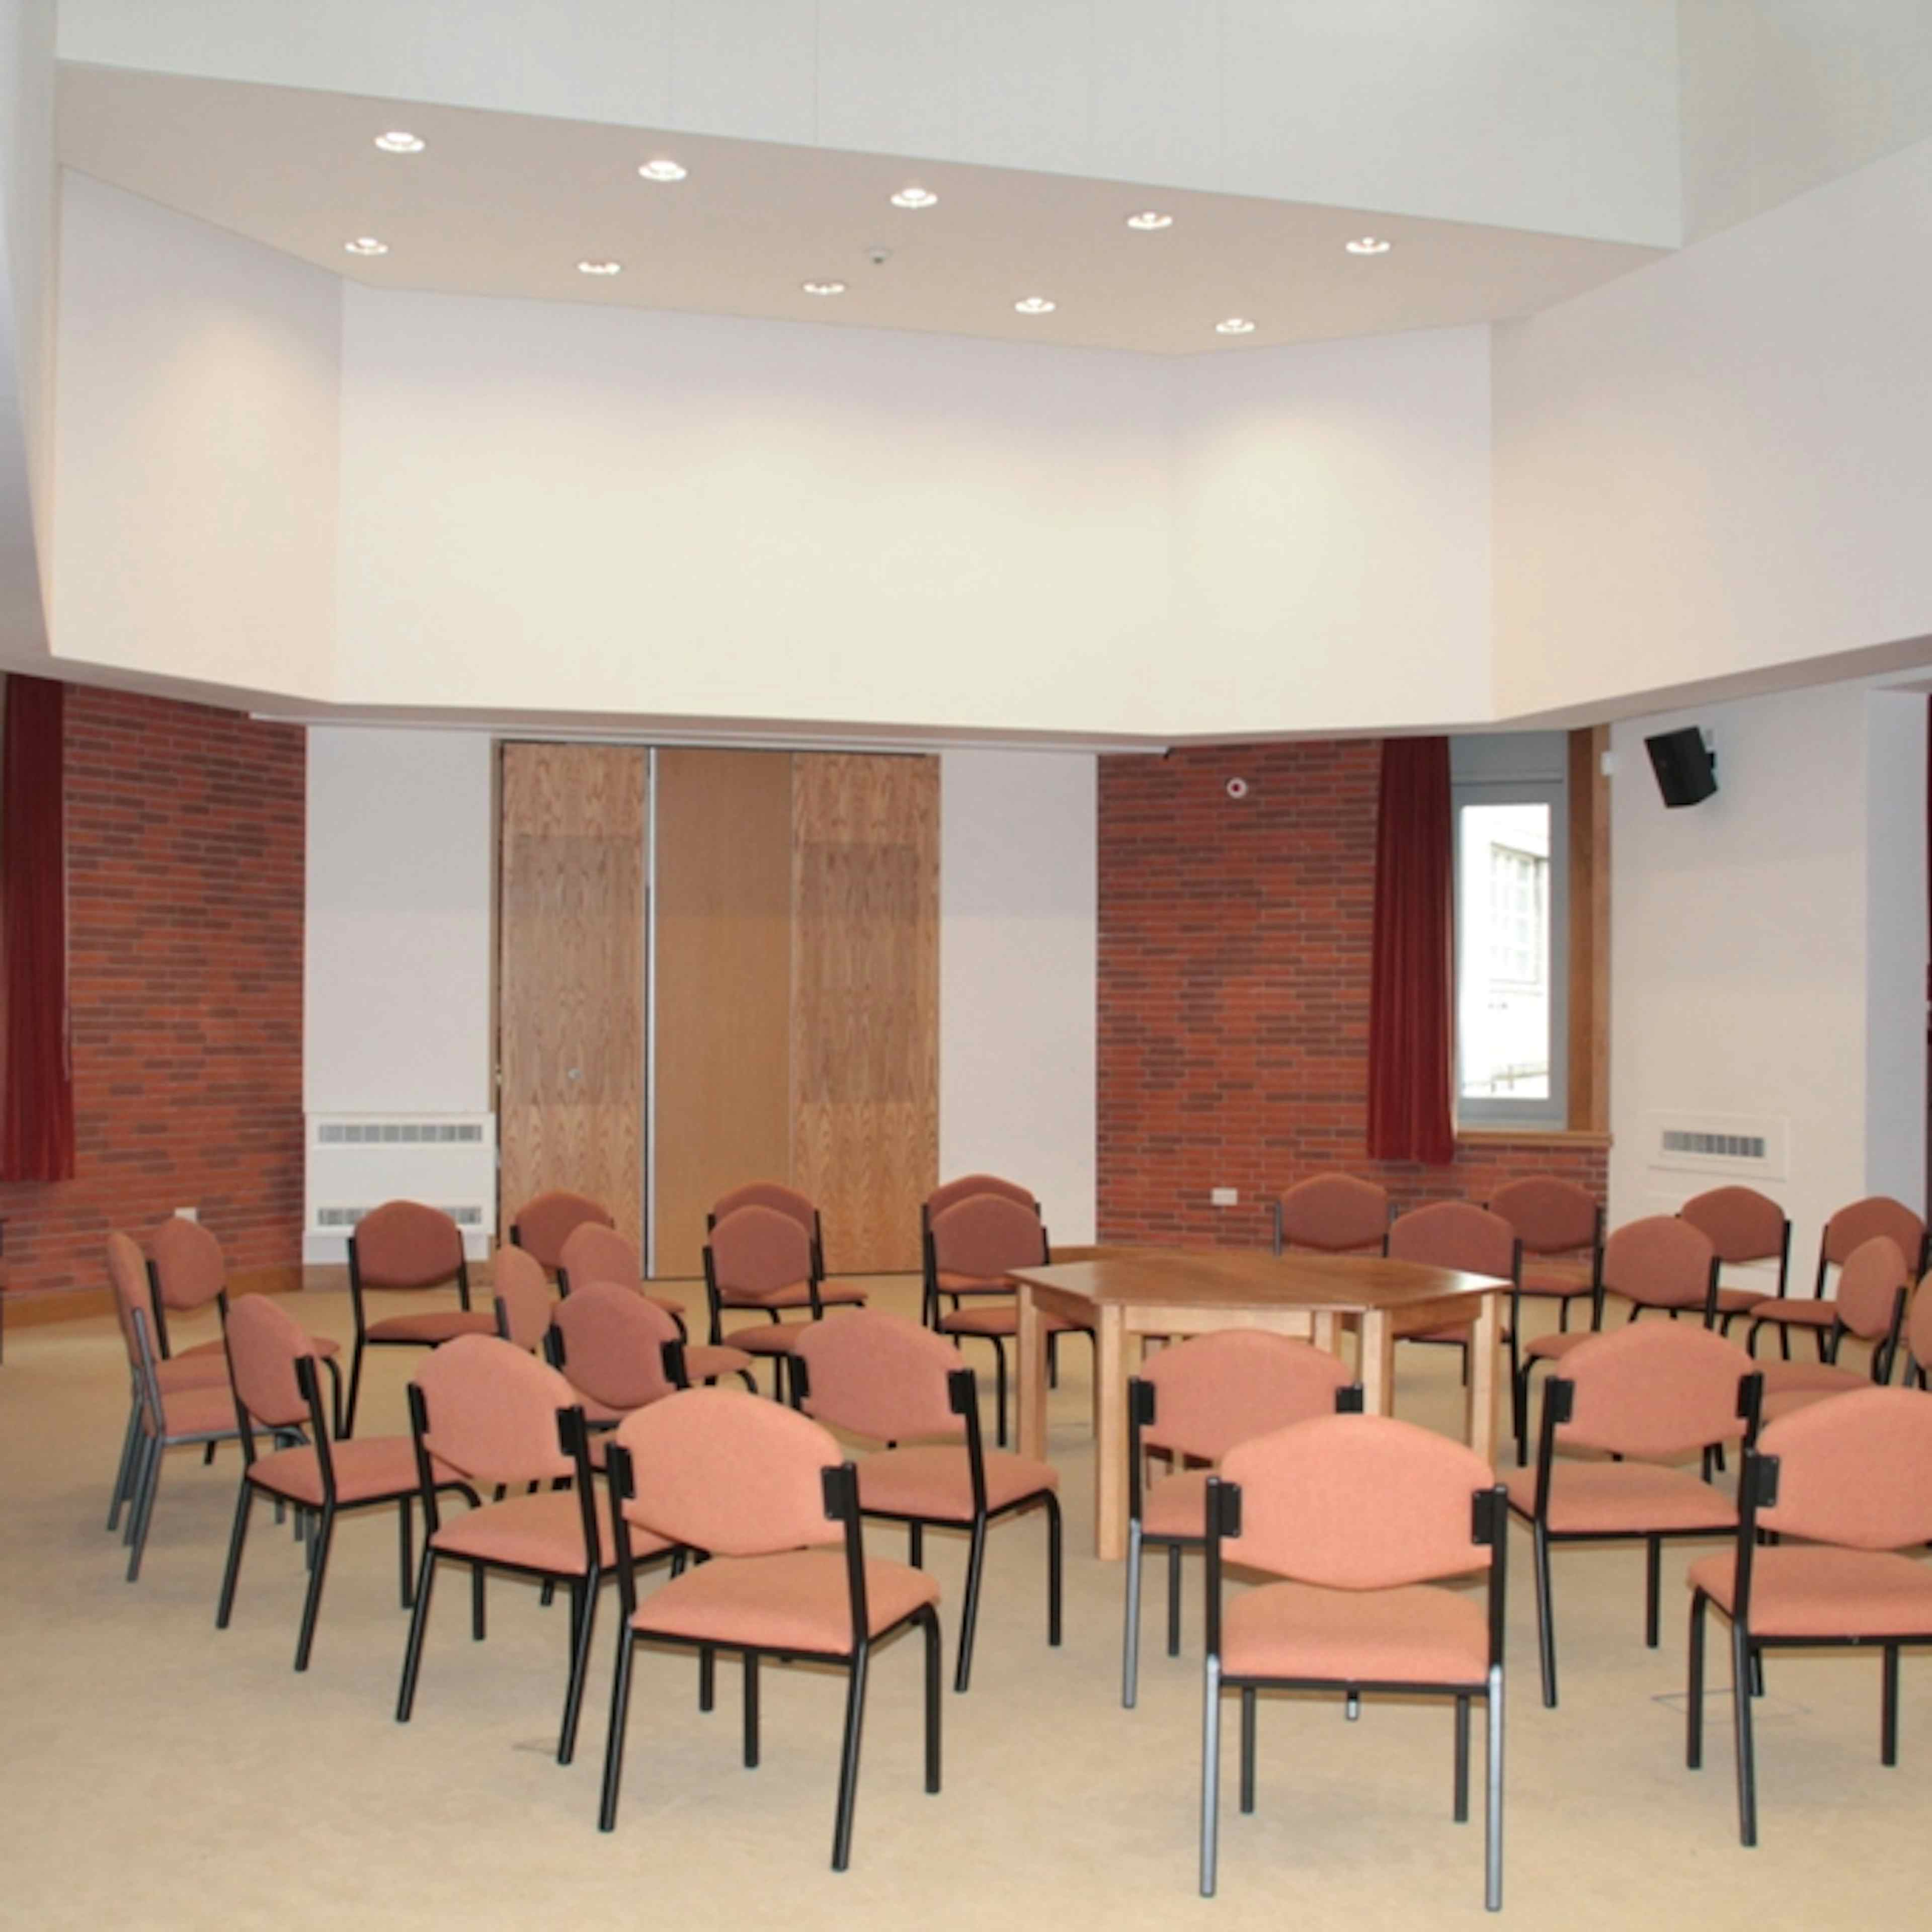 Liverpool Quaker Meeting House - Large Meeting Room image 3